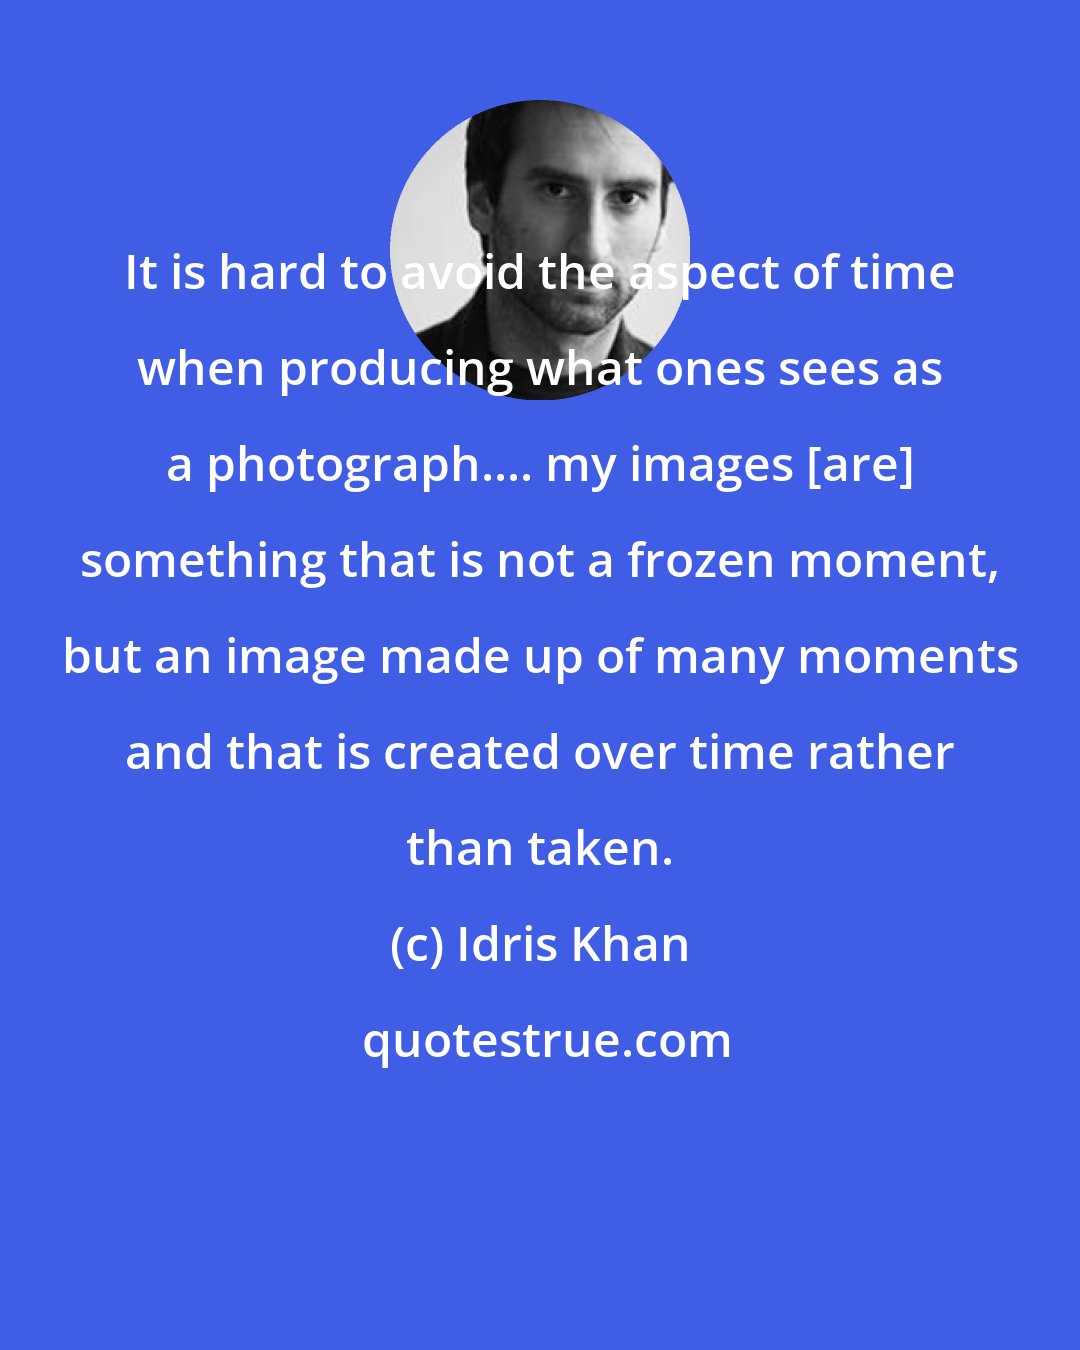 Idris Khan: It is hard to avoid the aspect of time when producing what ones sees as a photograph.... my images [are] something that is not a frozen moment, but an image made up of many moments and that is created over time rather than taken.